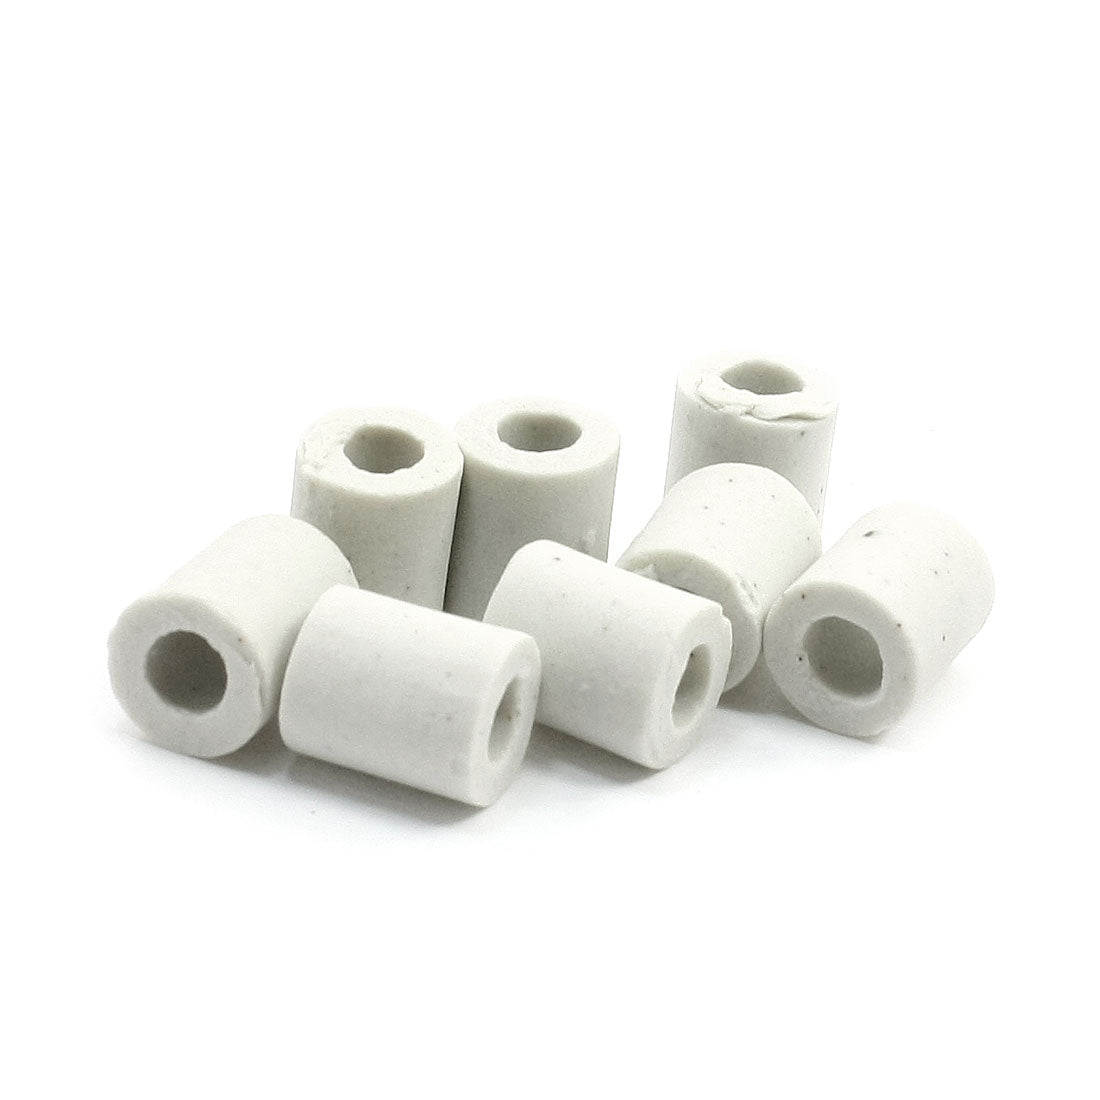 uxcell Uxcell 10 Pcs Cylindrical Ceramic Insulation Pipe White 0.47" x 0.39" x 0.2"